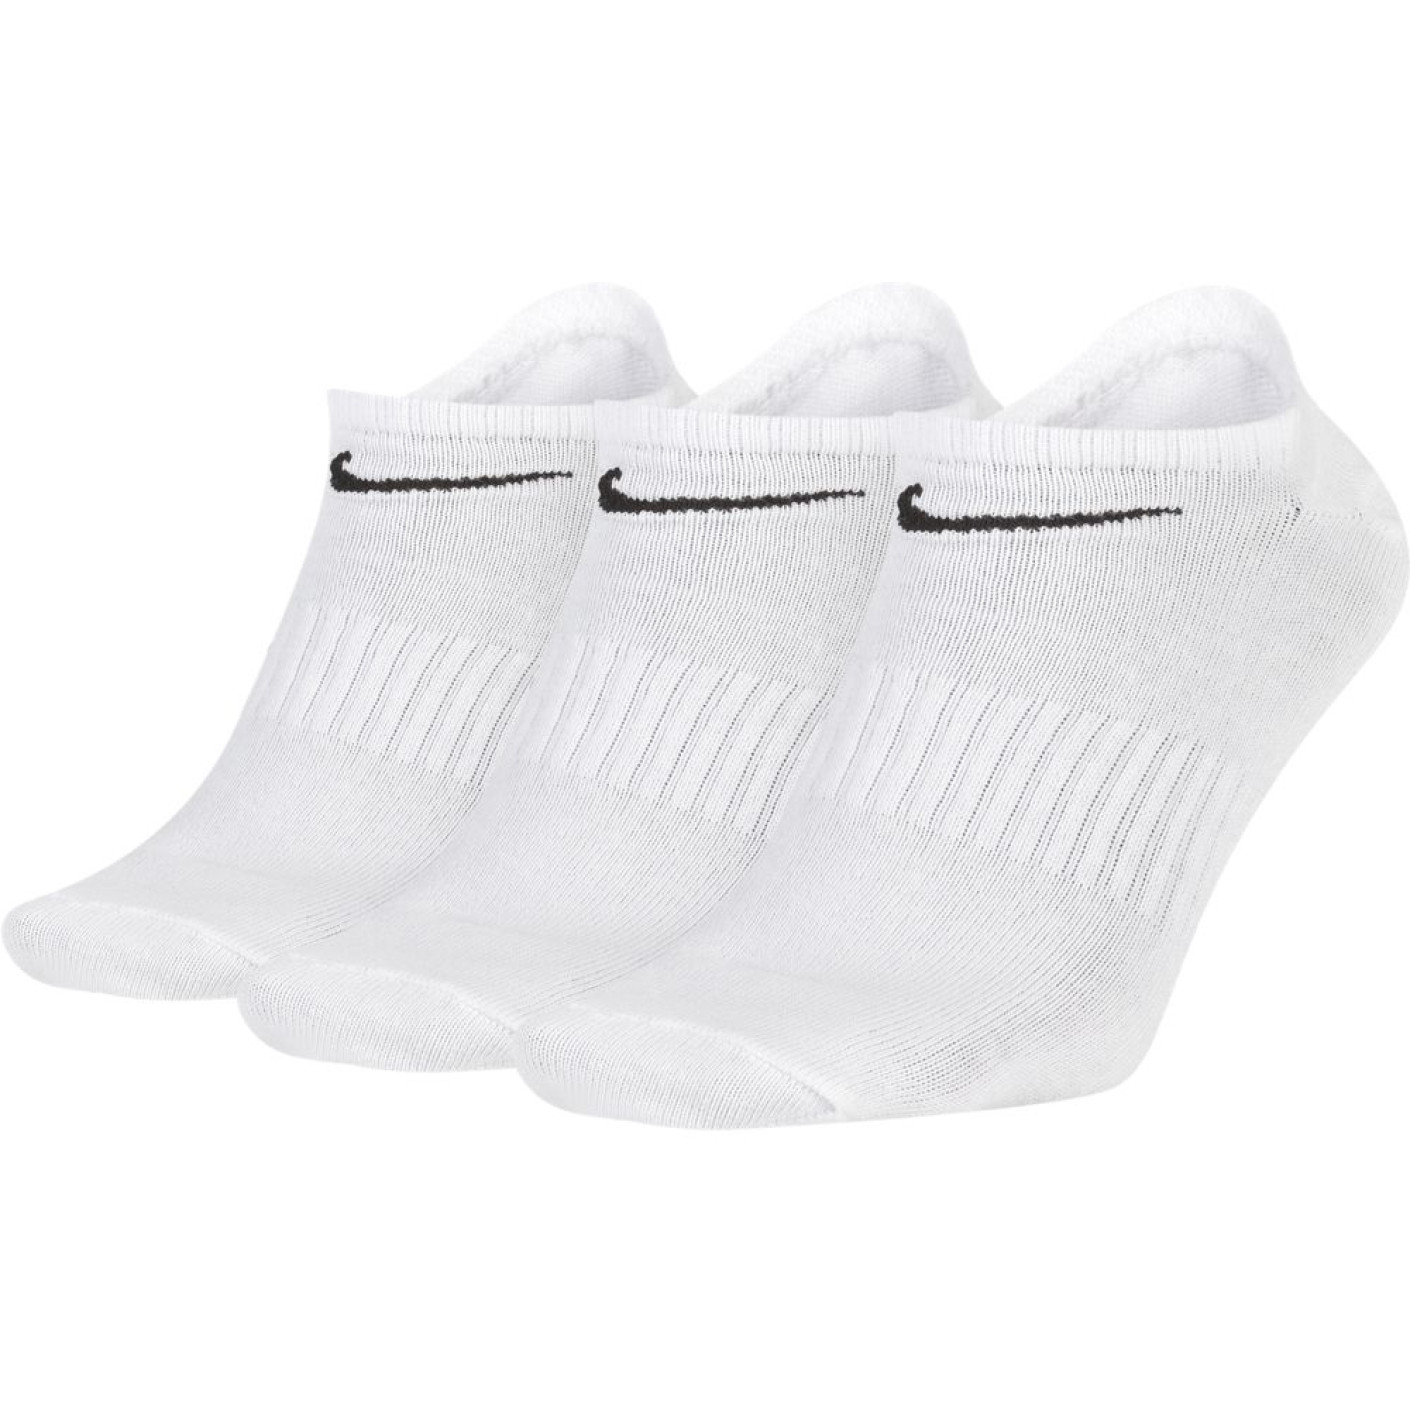 Nike Everyday Lightweight Socquettes No-Show 3-Pack Blanc